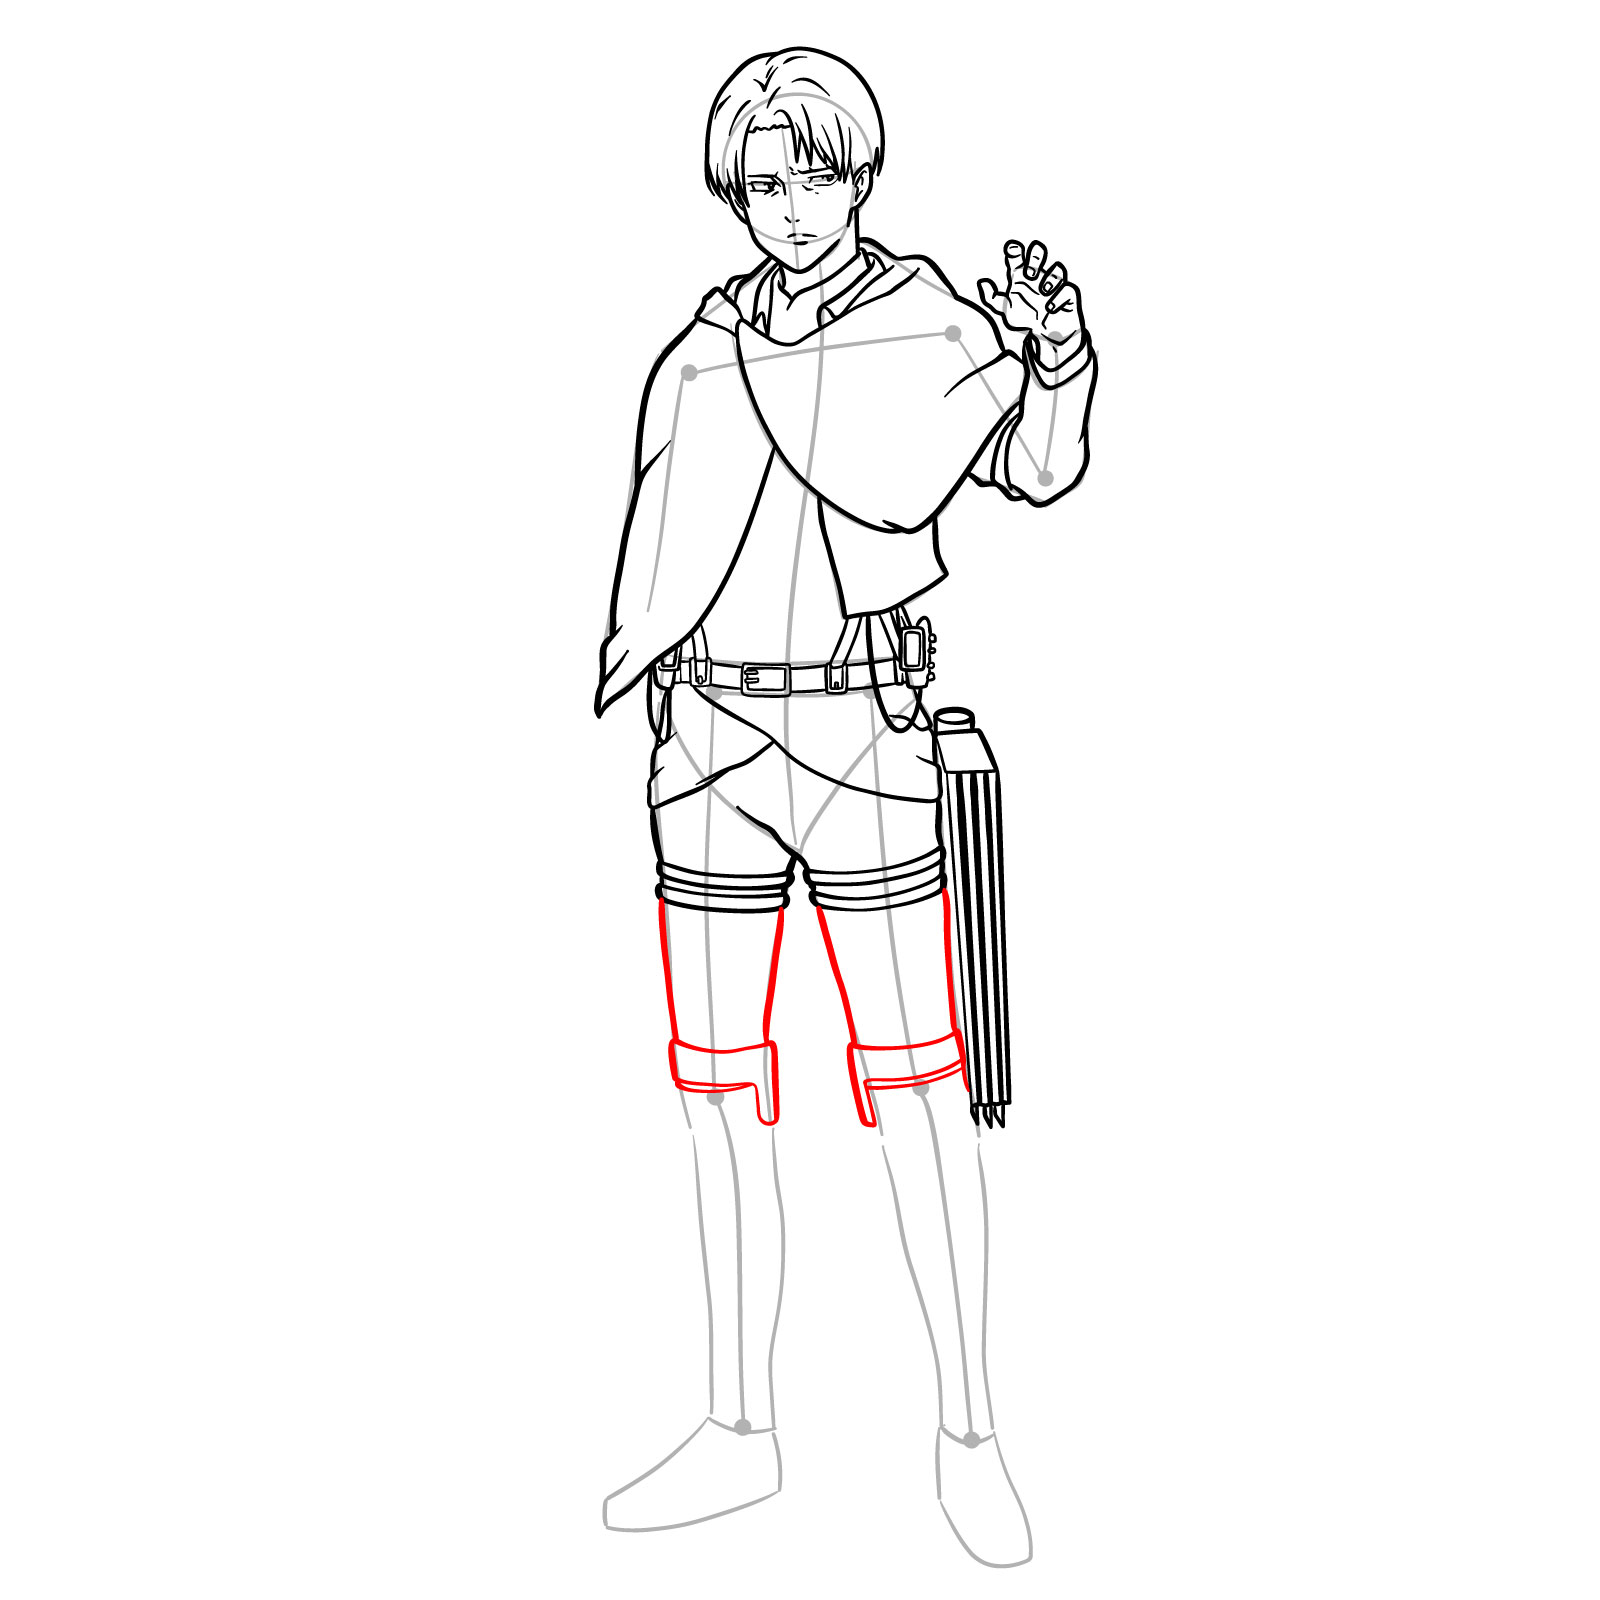 Step-by-step guide on drawing Captain Levi's legs and left ODM gear for a full body portrait - step 21